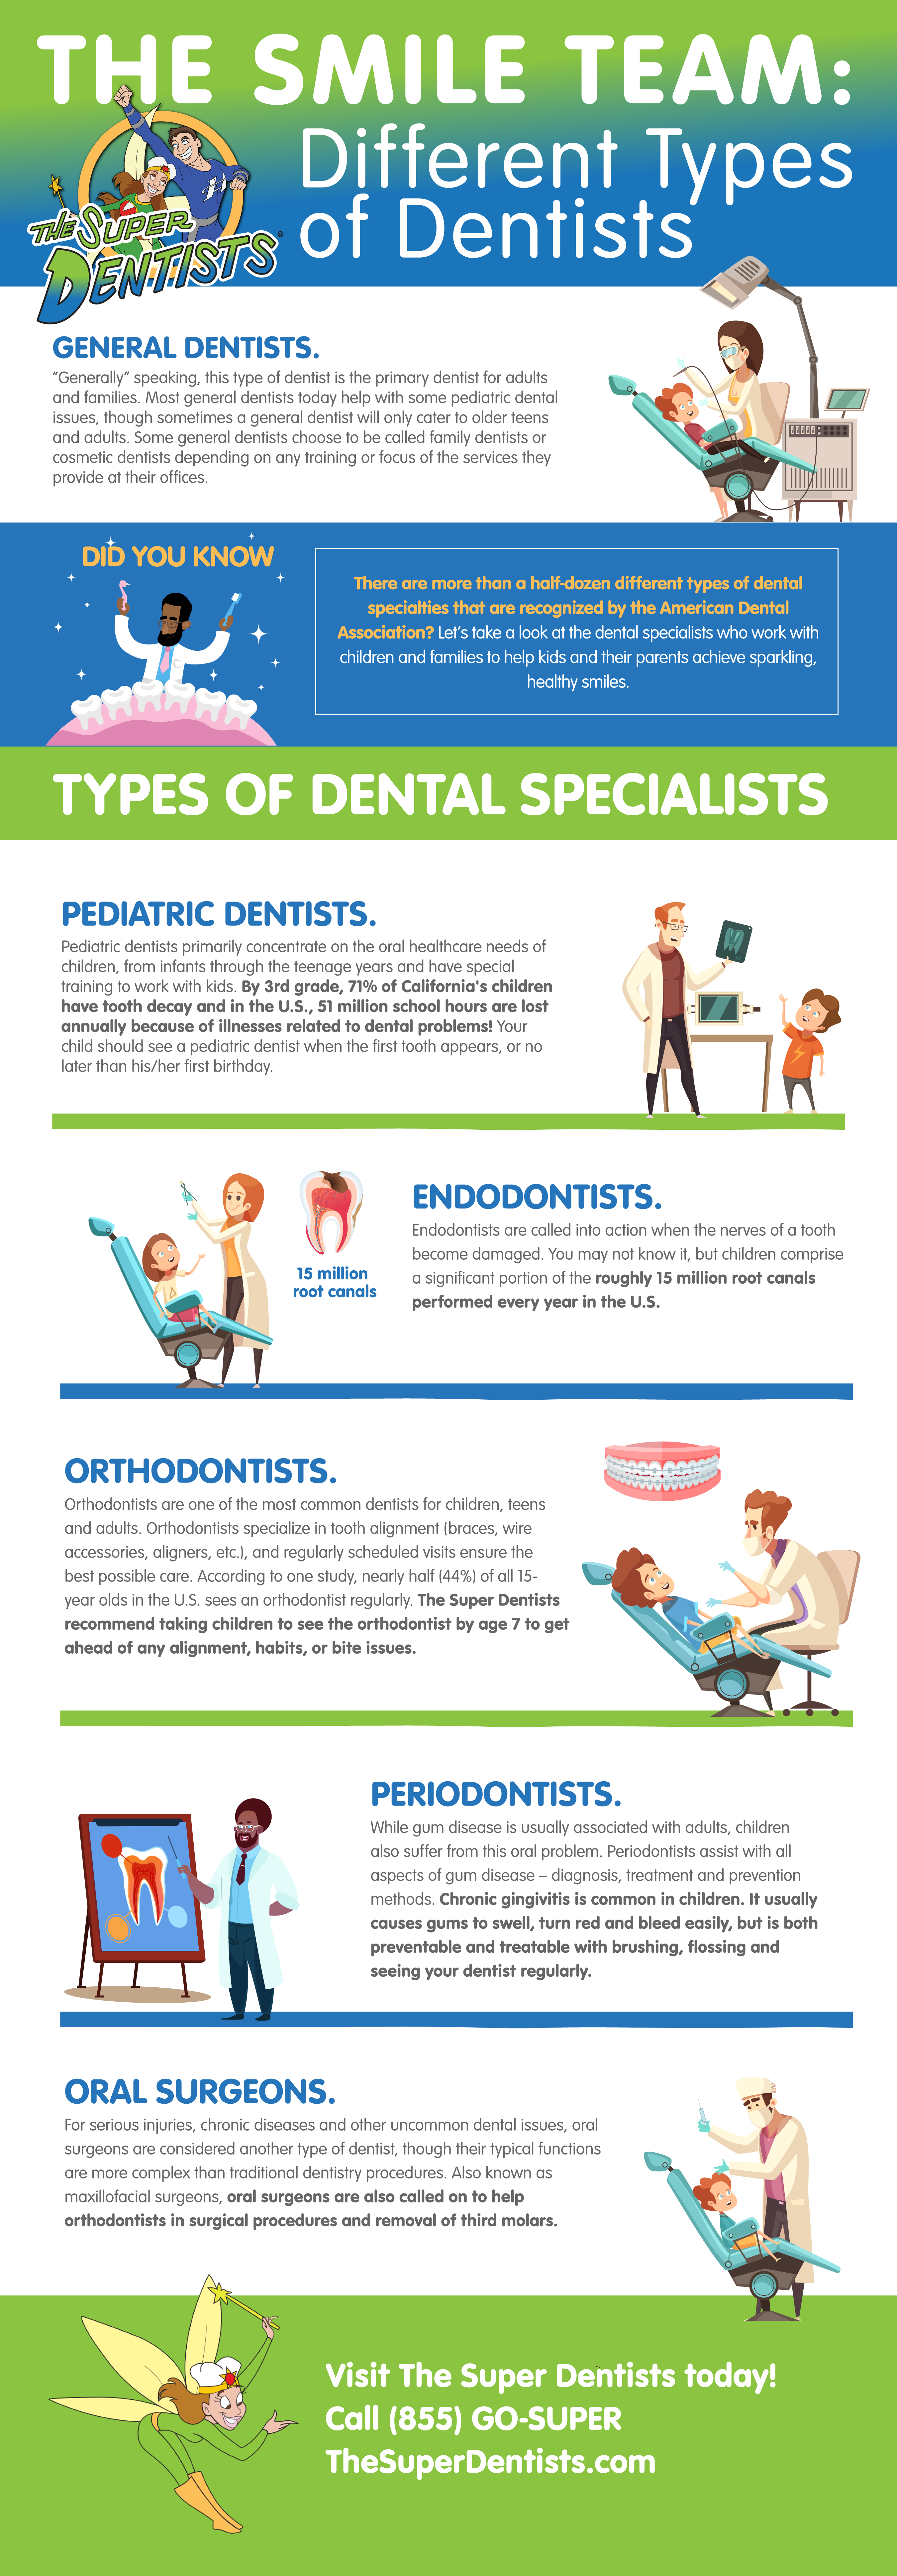 Different Types of Dentists